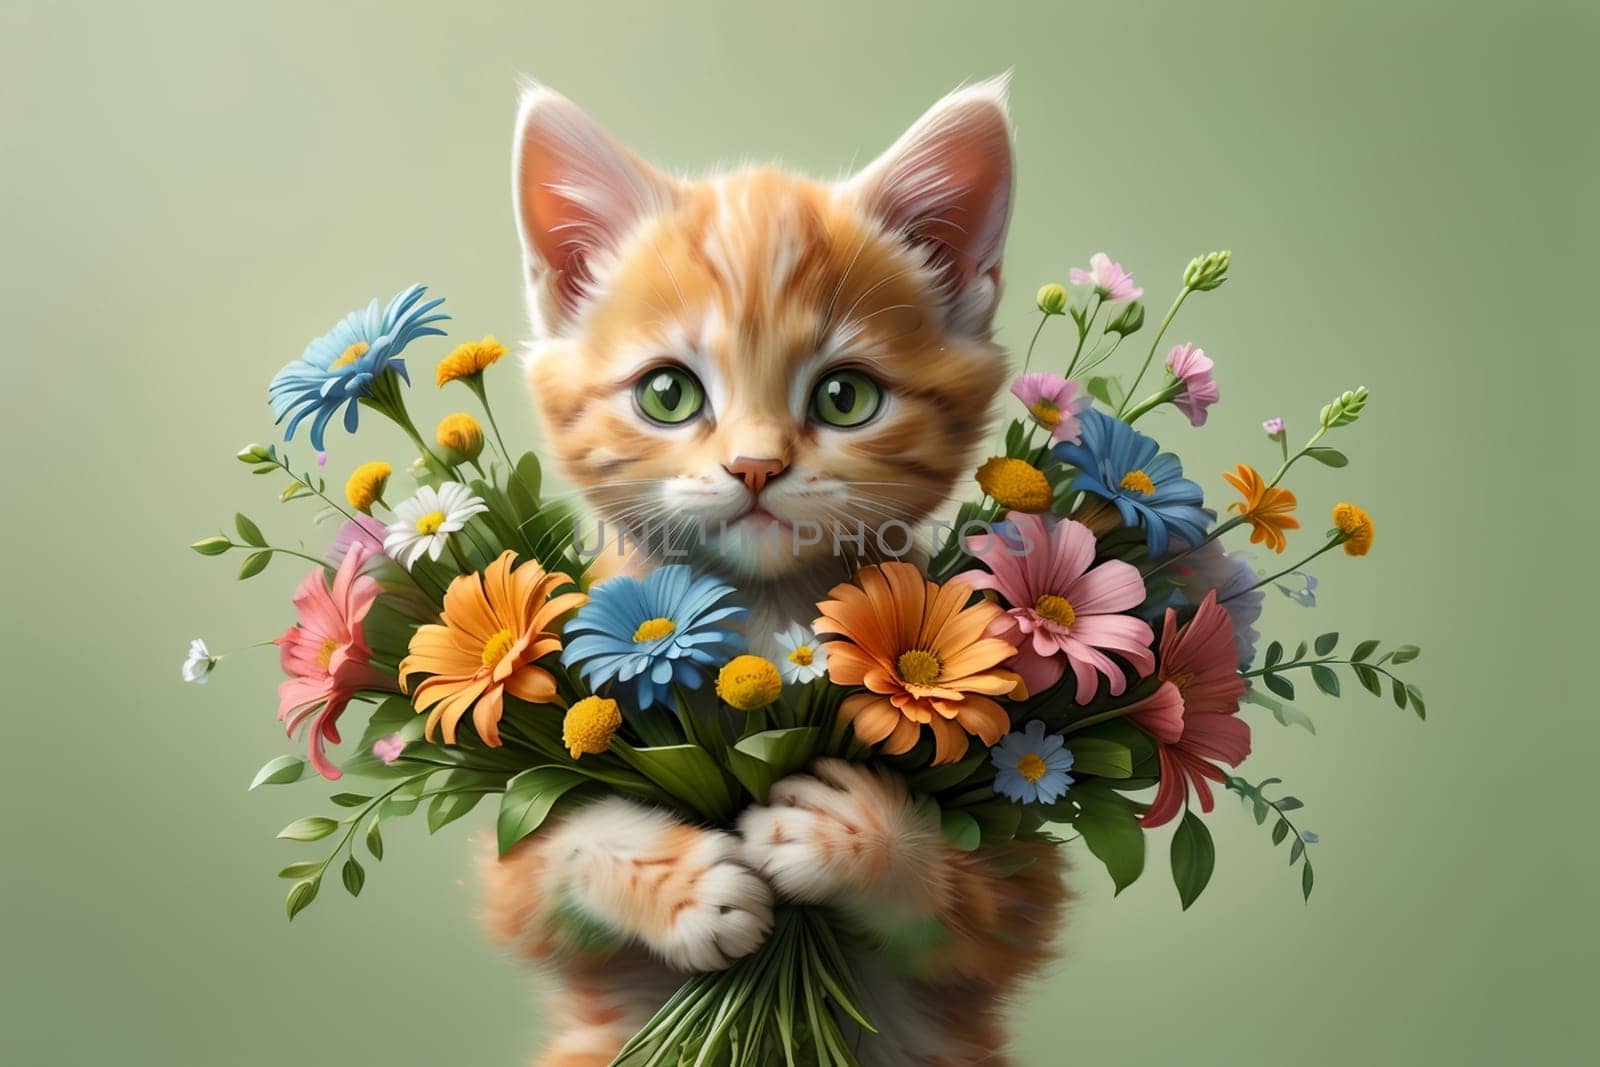 Cute kitten with a large bouquet of flowers .